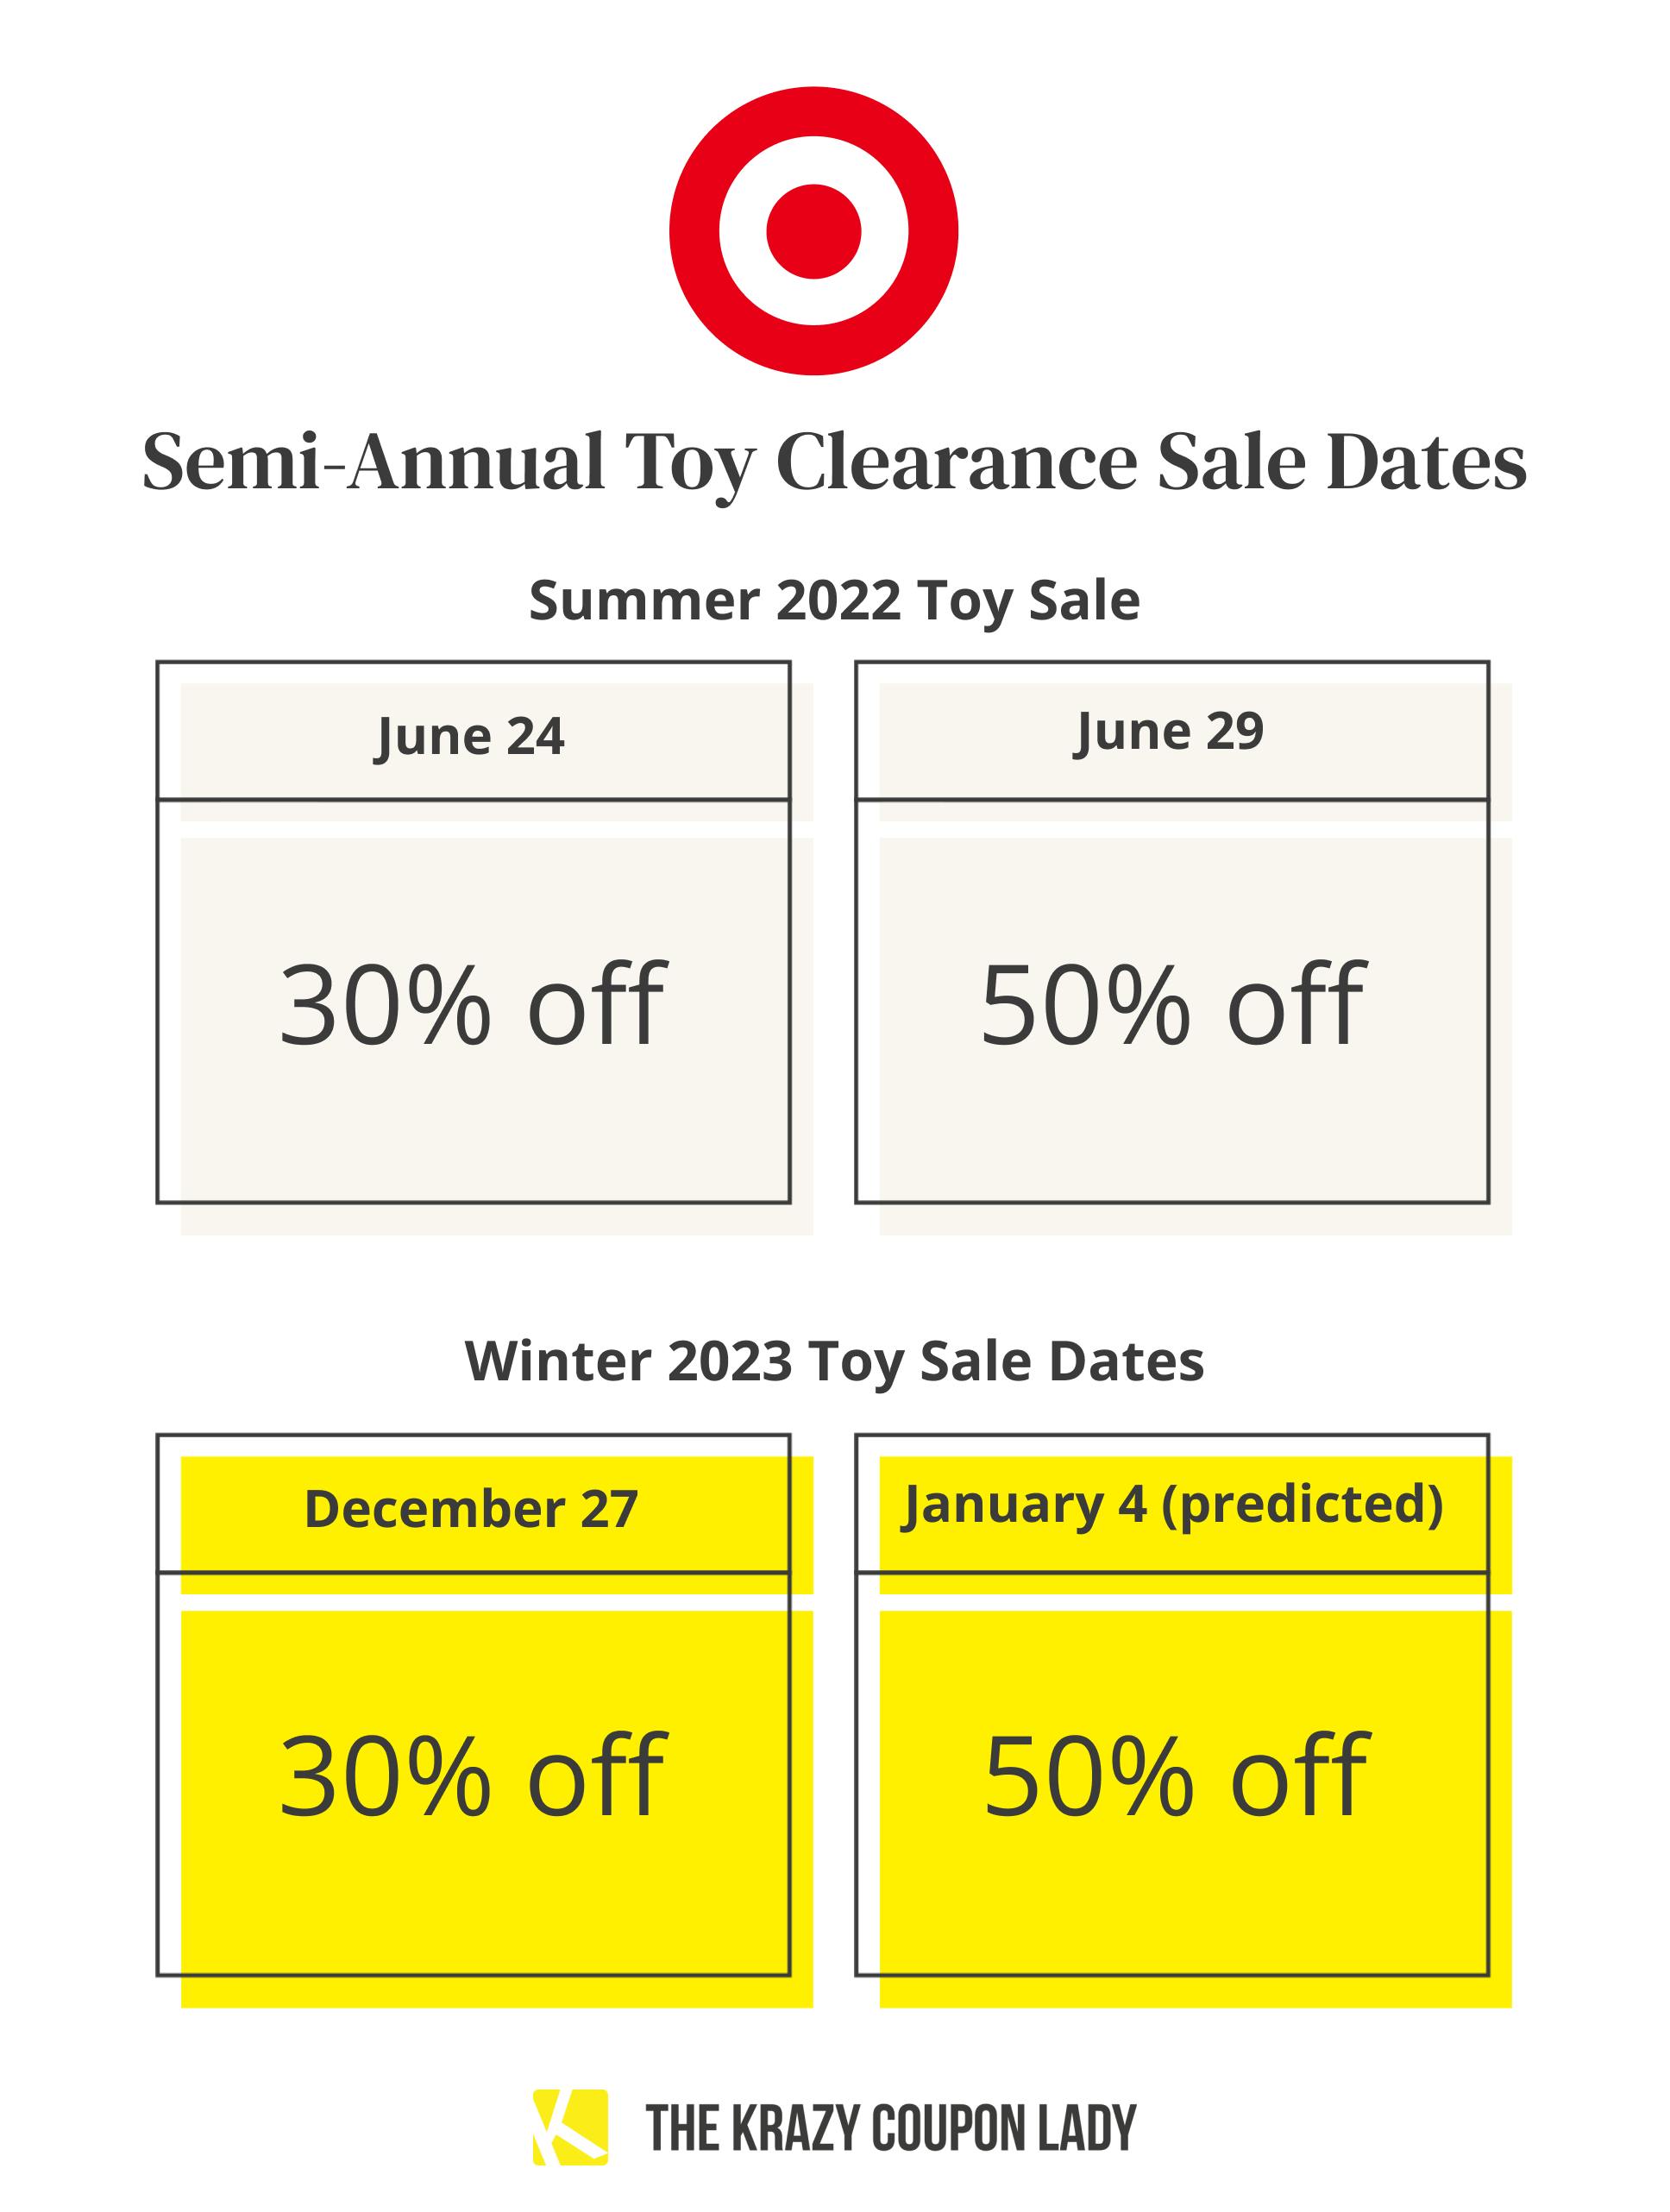 Start dates for the Target Toy Sale in winter 2023.